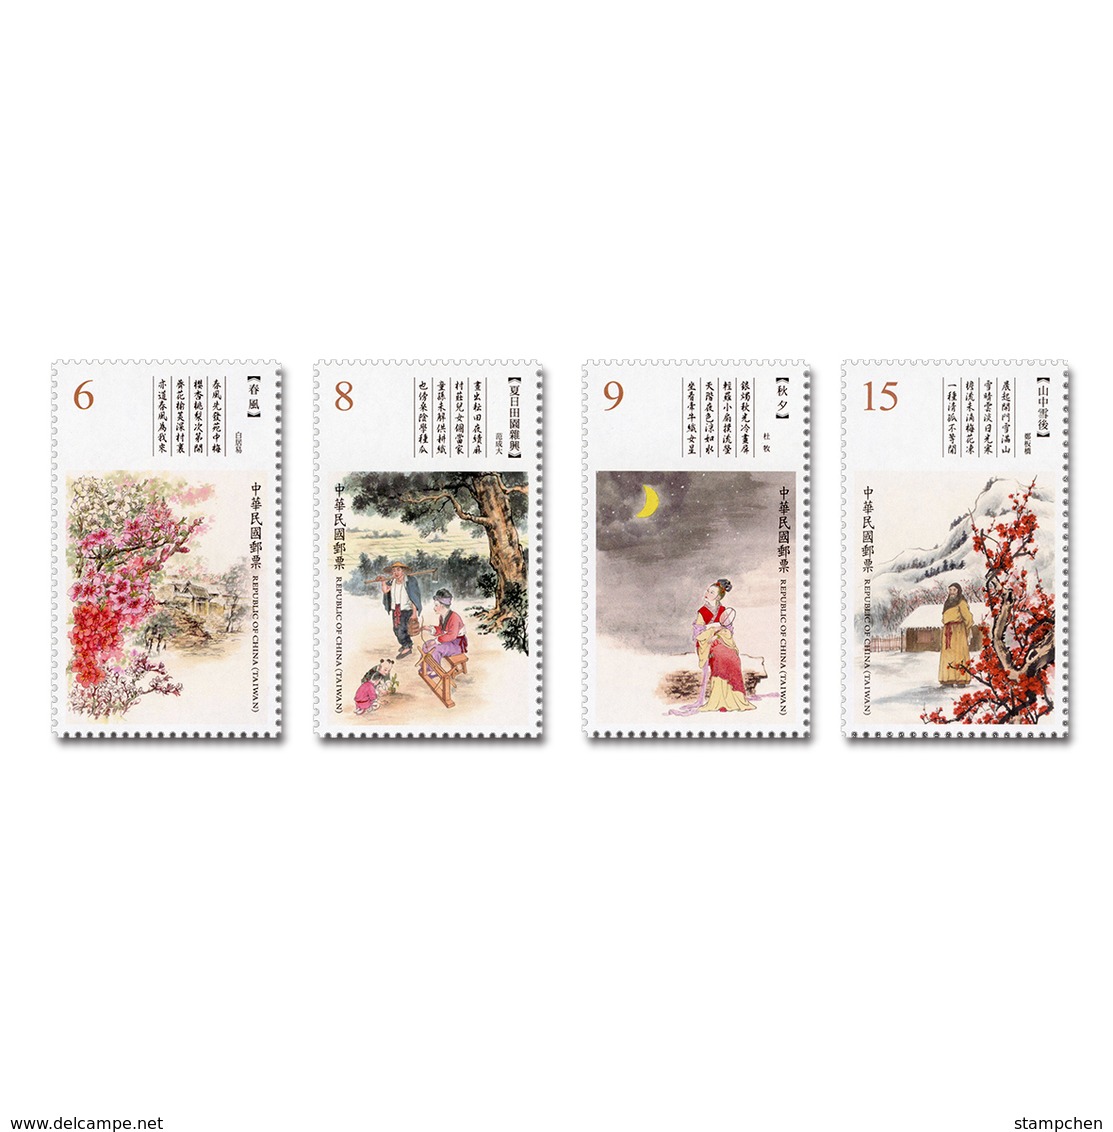 2019 Ancient Chinese Poetry Stamps - 4 Seasons Plums Cherry Textile Moon Snow Costume - Textile